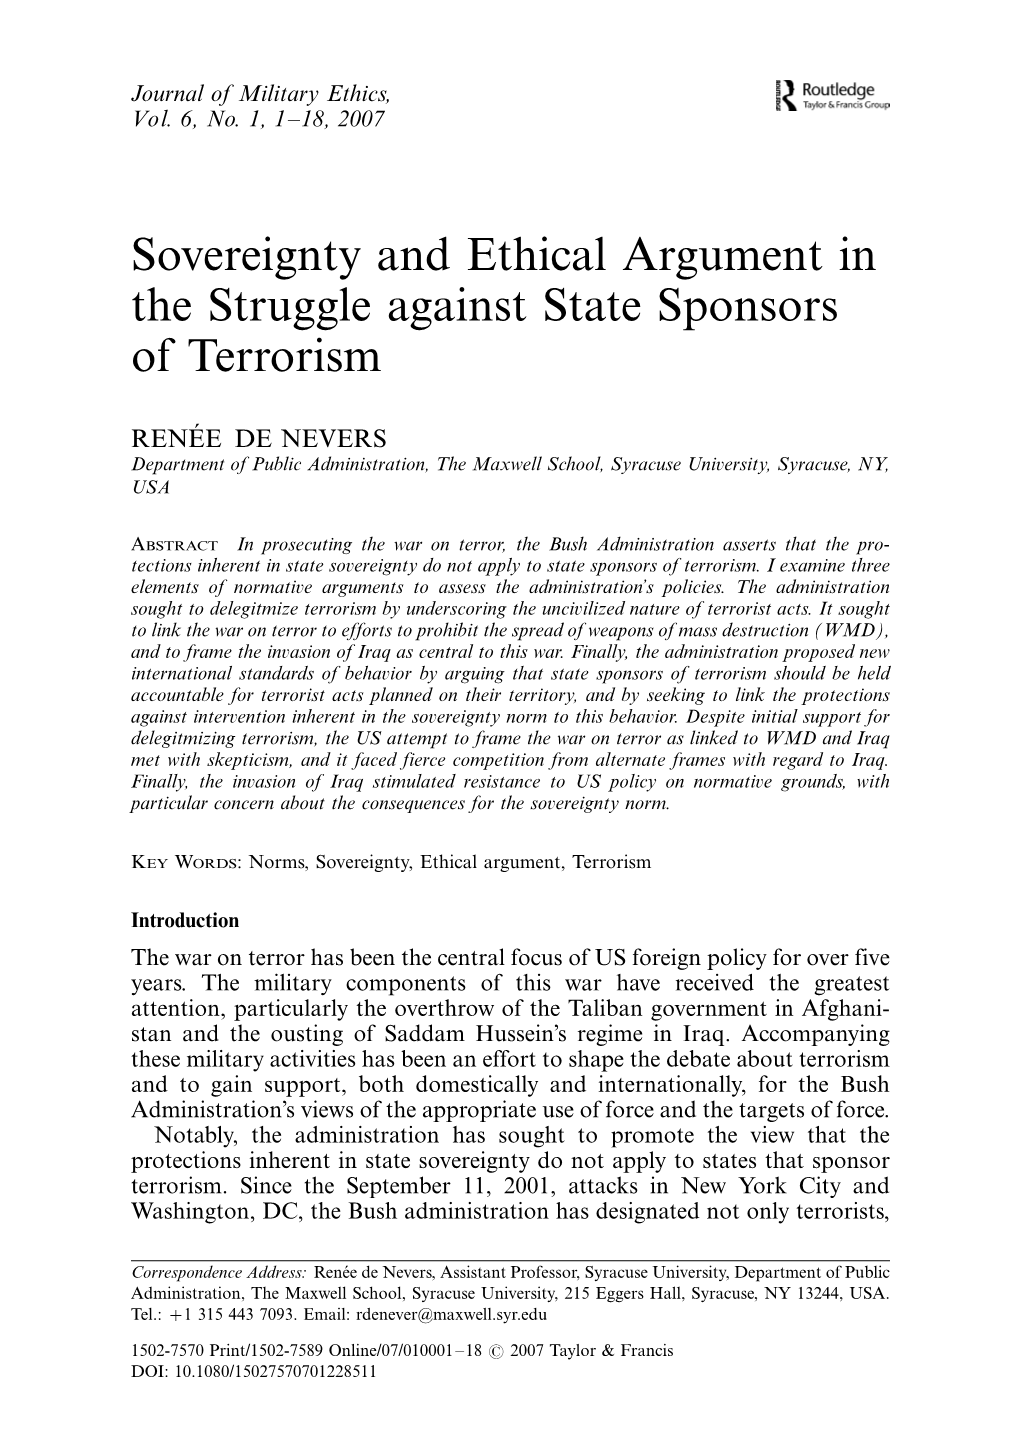 Sovereignty and Ethical Argument in the Struggle Against State Sponsors of Terrorism